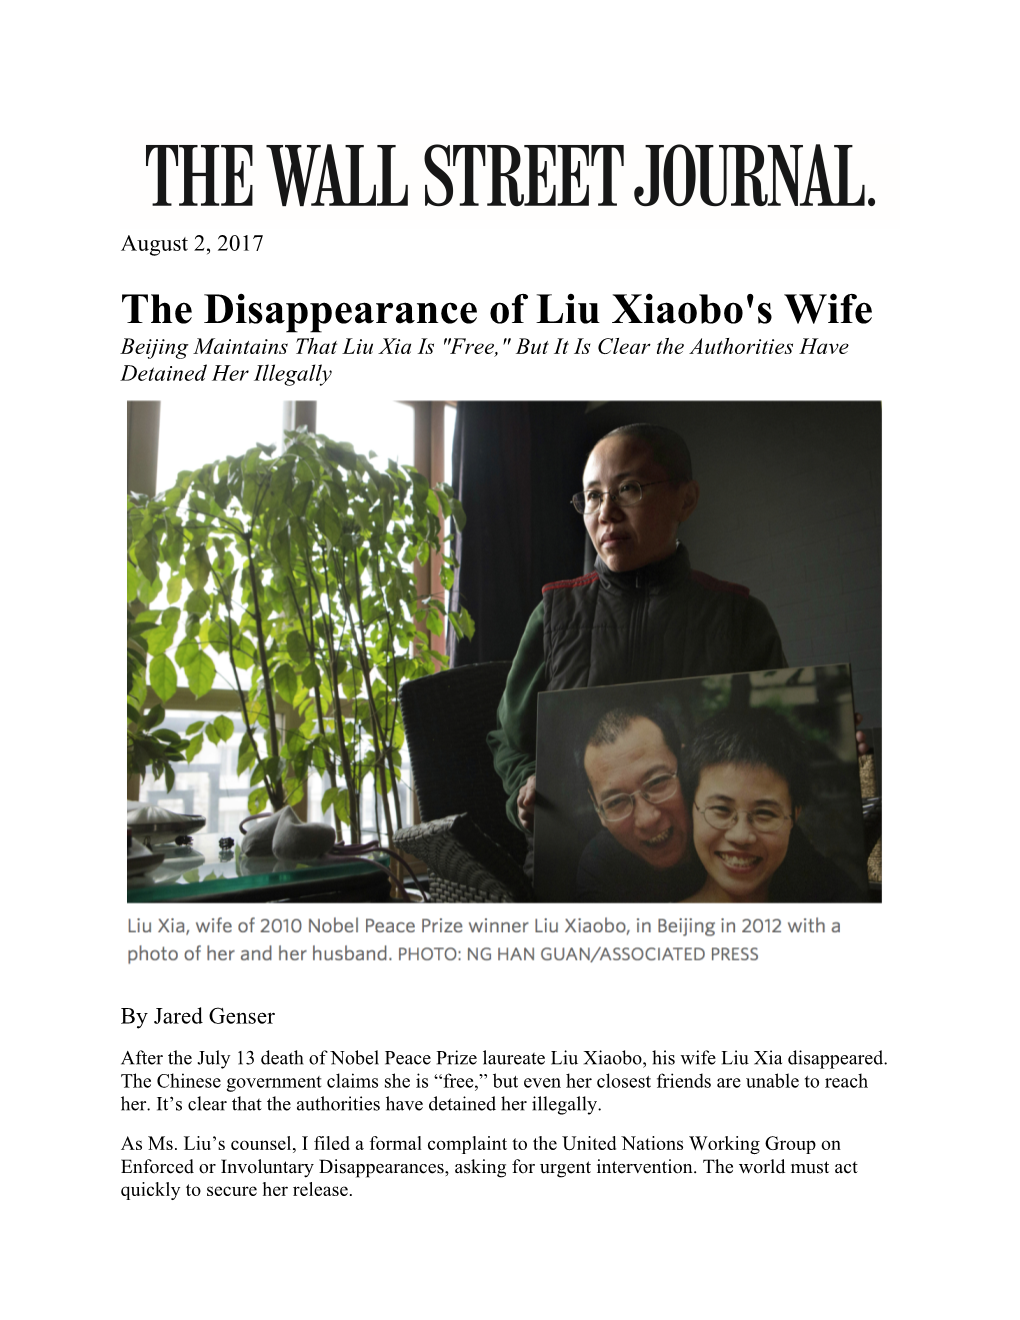 The Disappearance of Liu Xiaobo's Wife Beijing Maintains That Liu Xia Is "Free," but It Is Clear the Authorities Have Detained Her Illegally